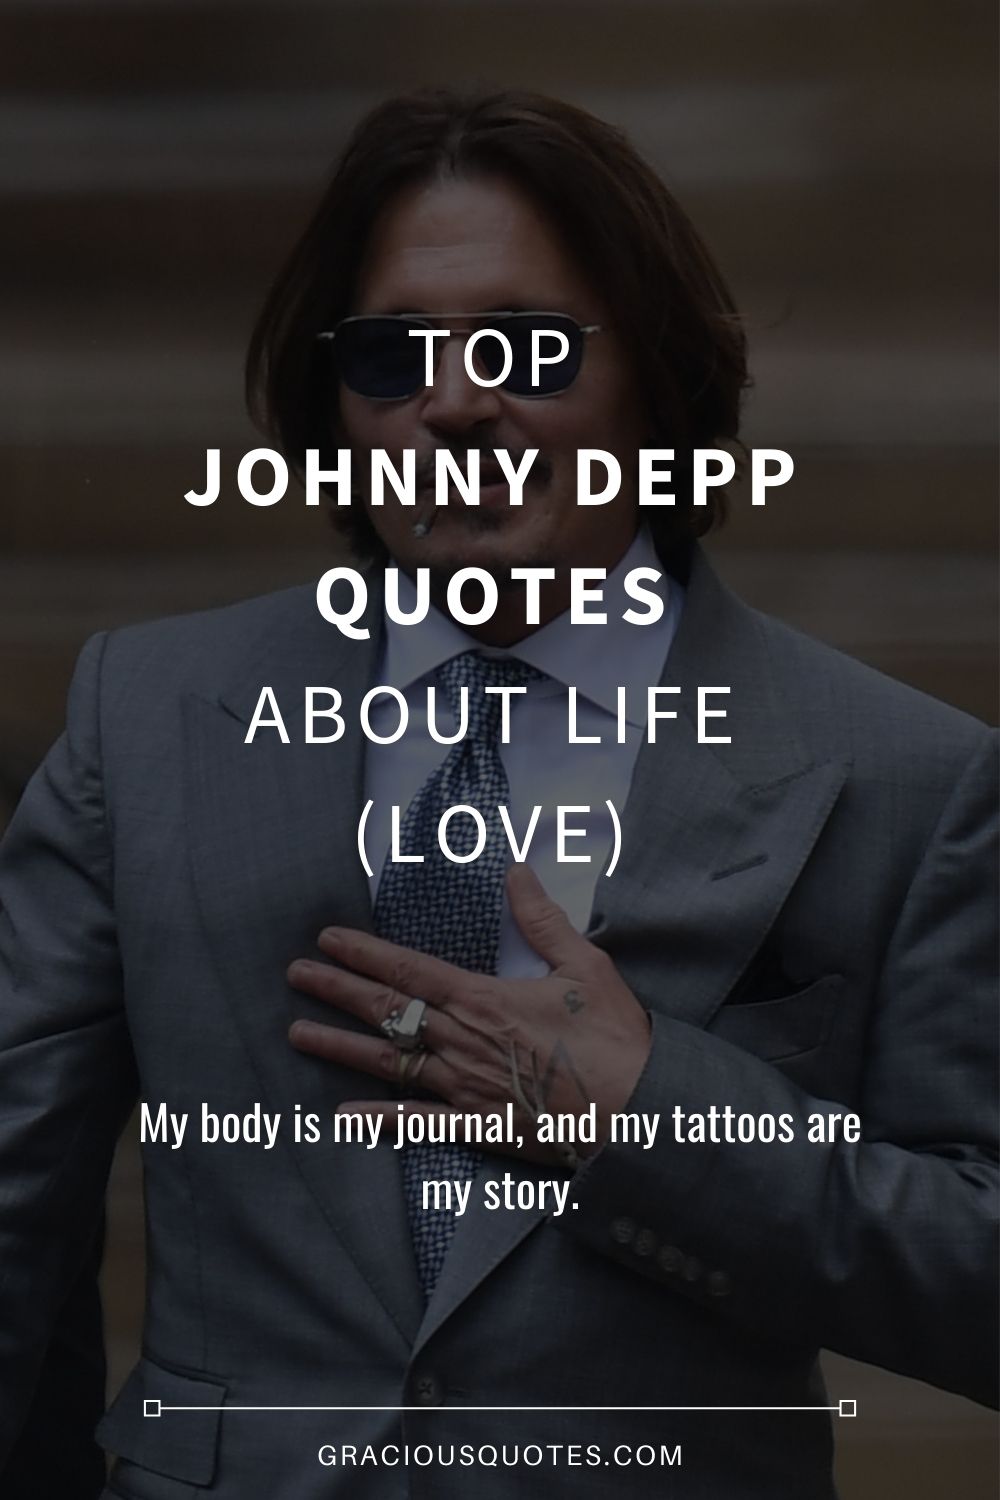 Top 41 Johnny Depp Quotes About Life (LOVE)